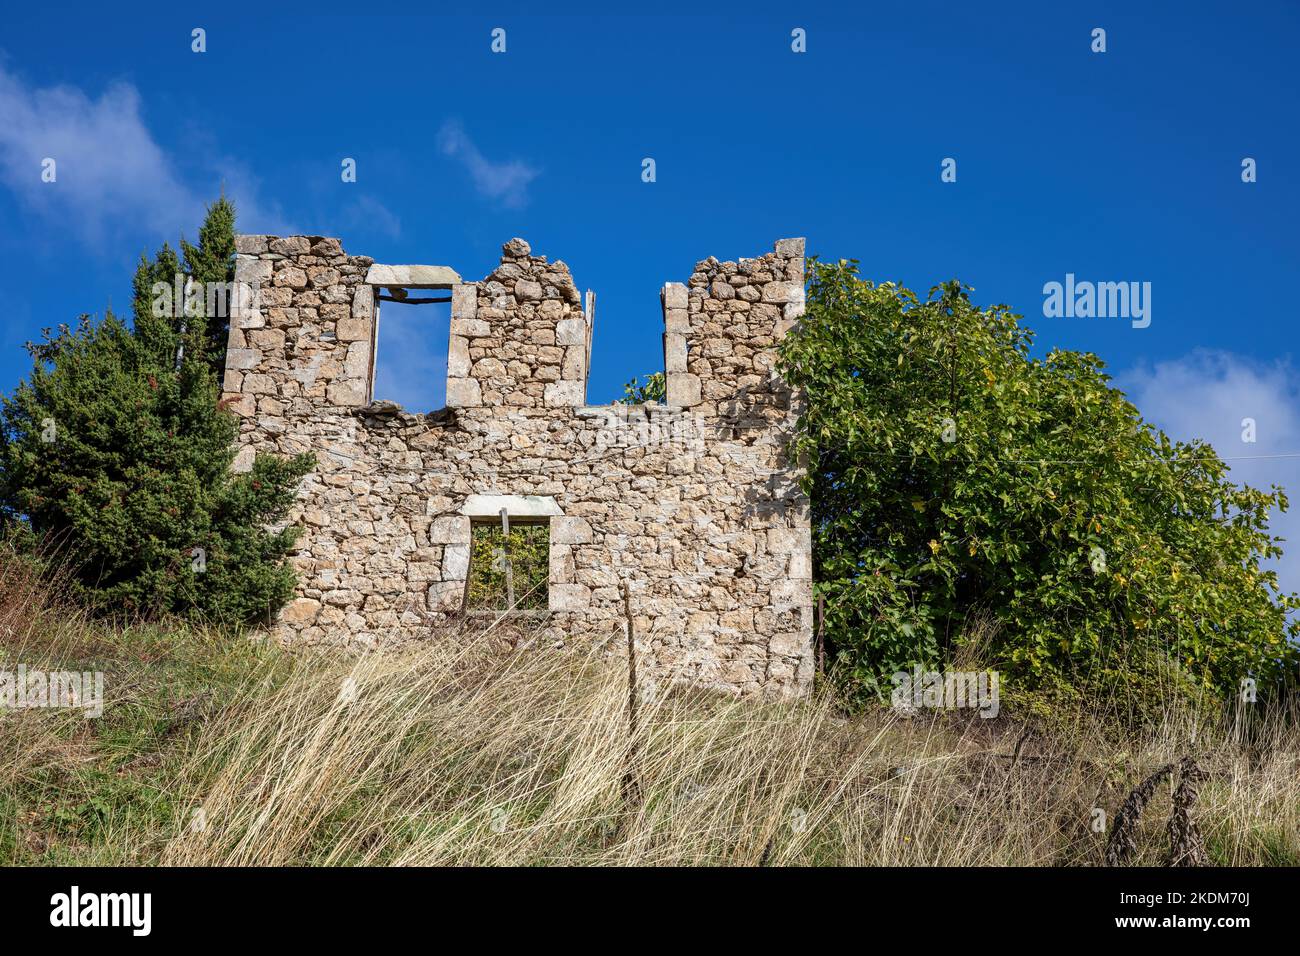 Ruined facade of an abandoned building, damaged stonewall house at rural environment, dry plant, tree, sunny day blue sky Peloponnese Greece. Stock Photo